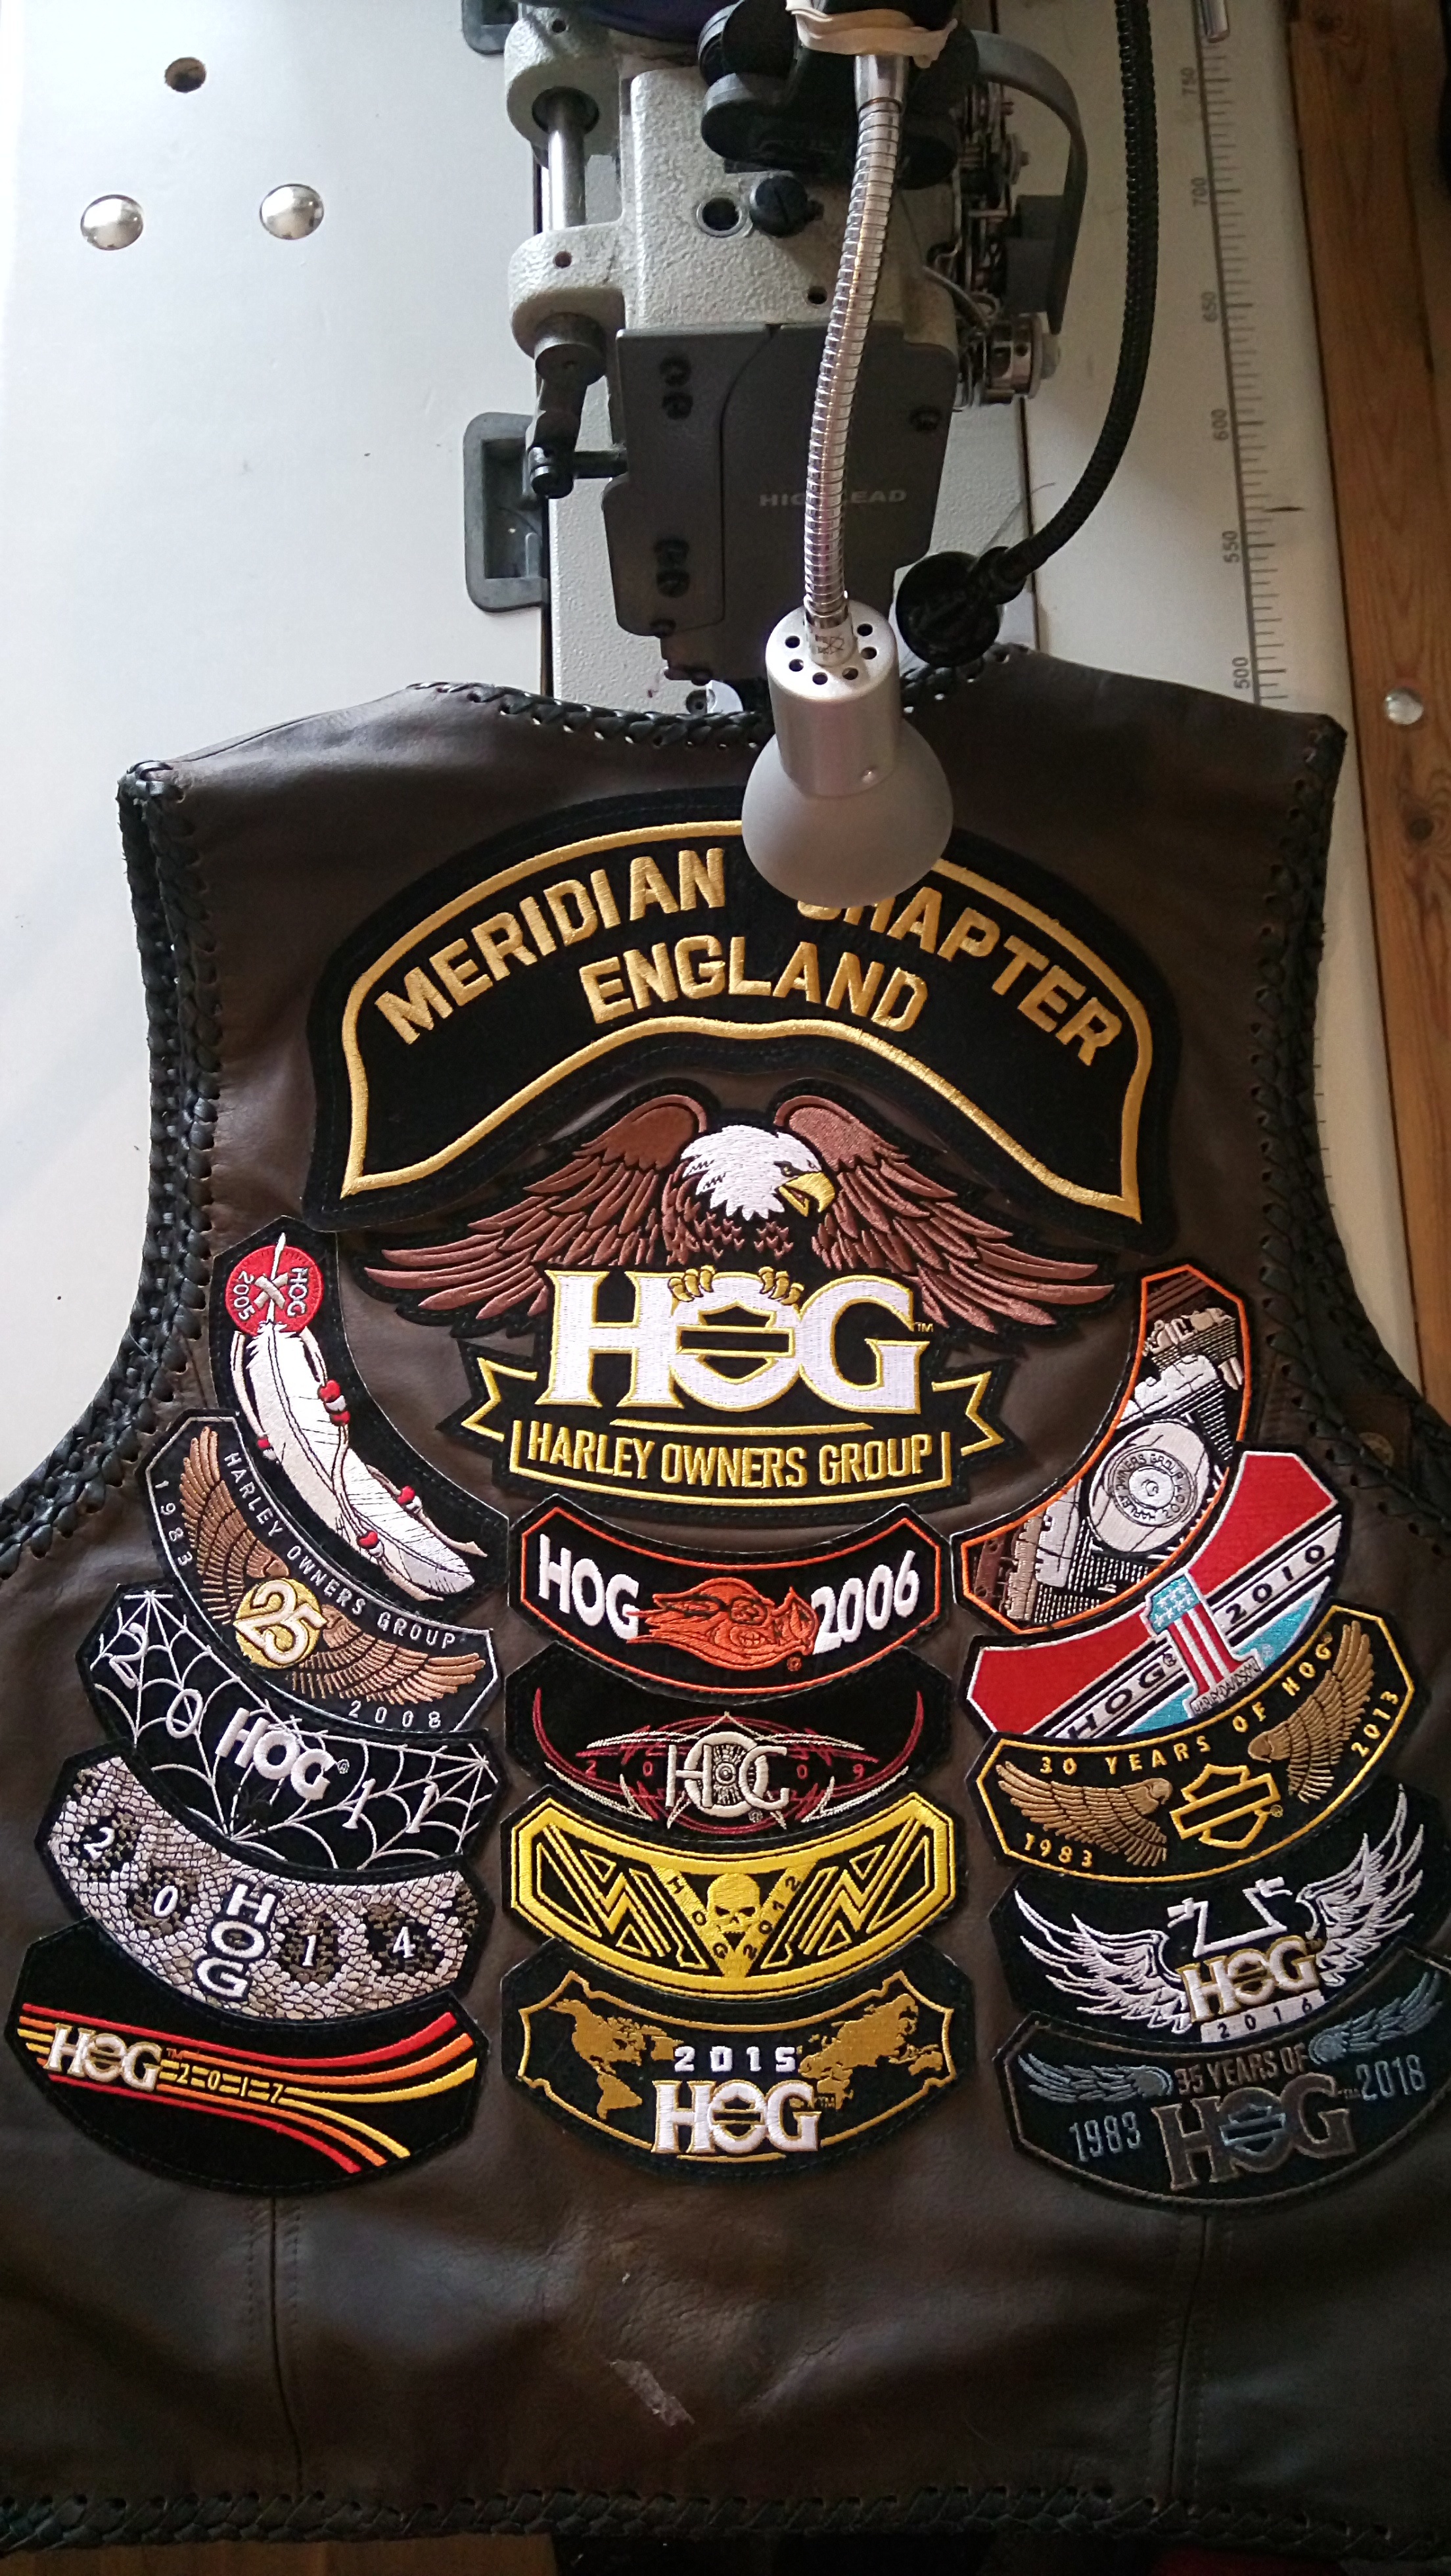 Patches and badges sewn on leathers